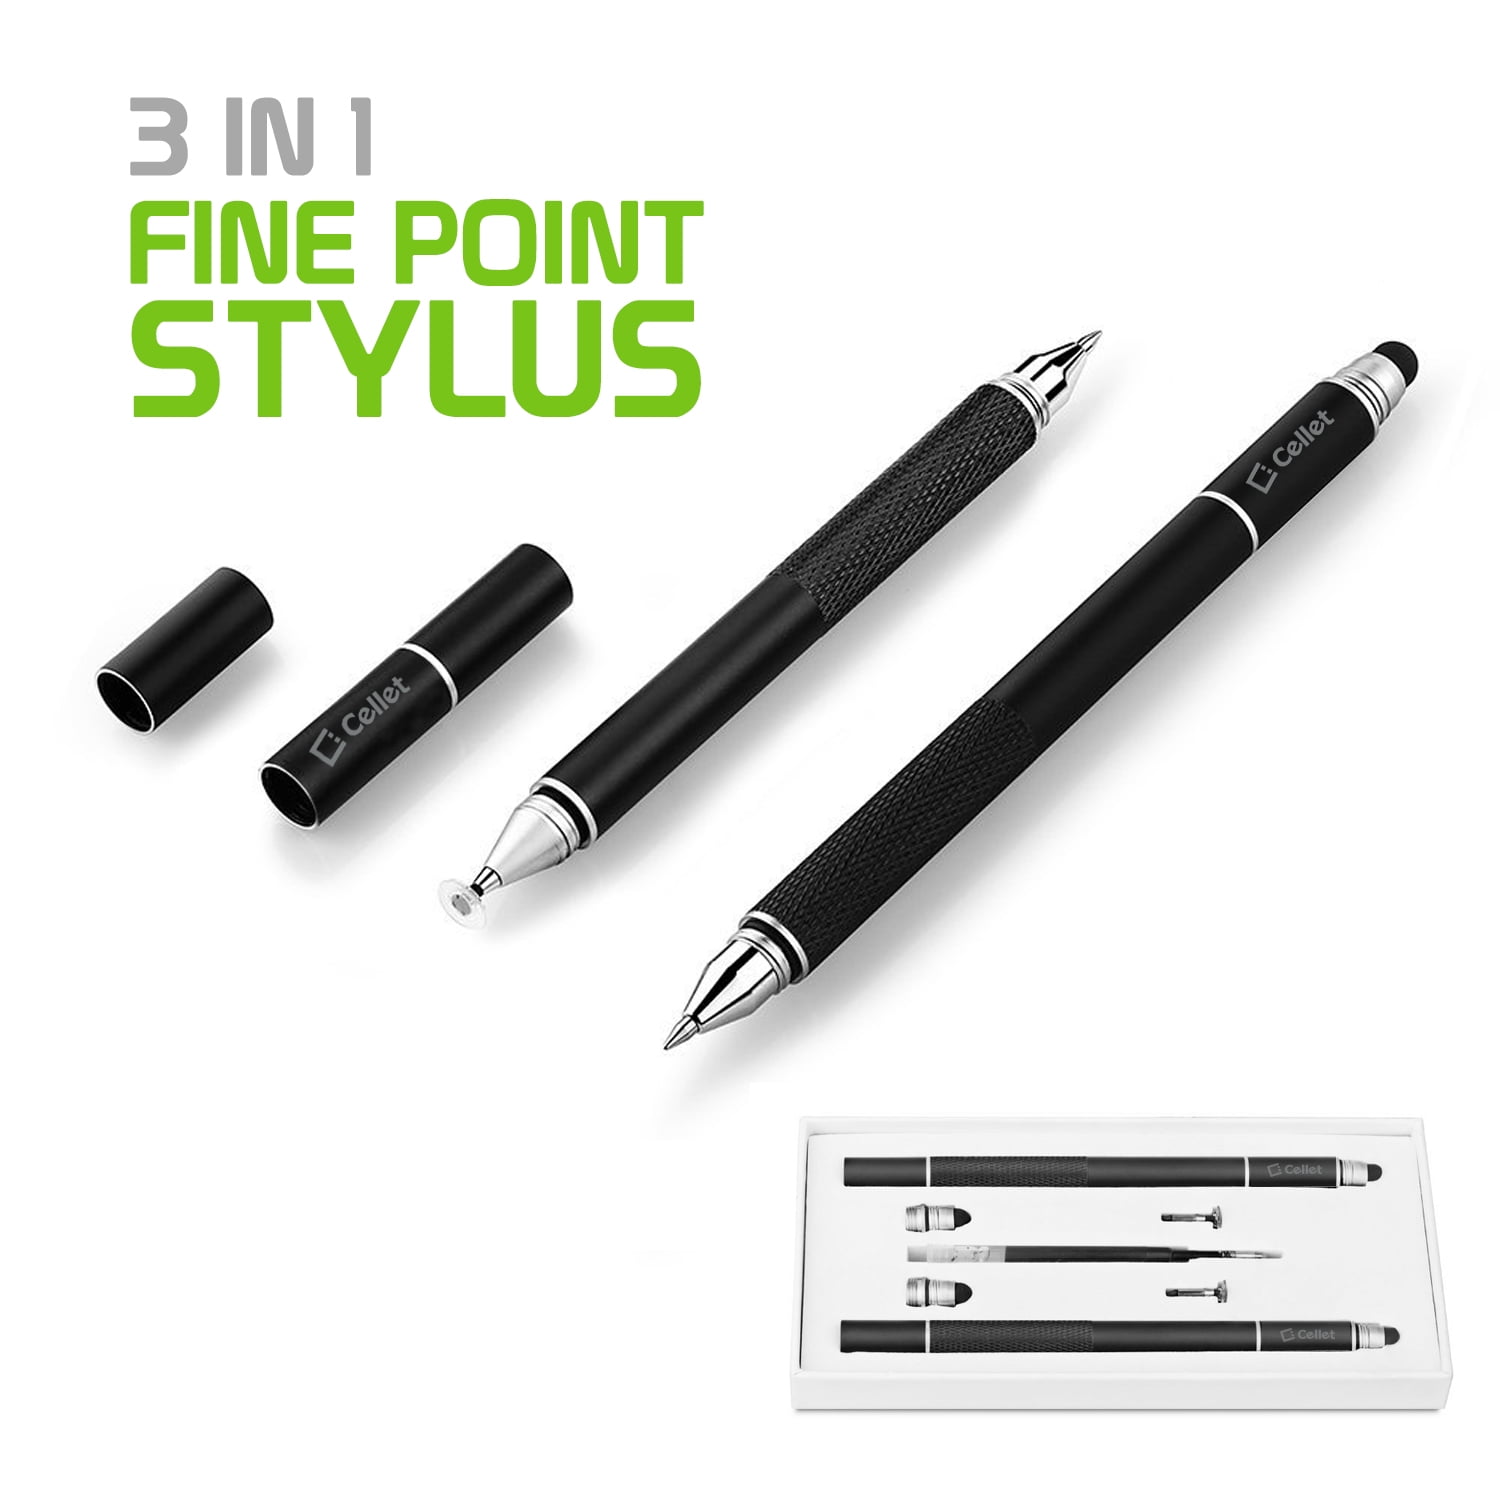 Fine Tip Point 3 in 1 Style Pen Touch Screen For Ipad Tablet  Ball Point Pen new